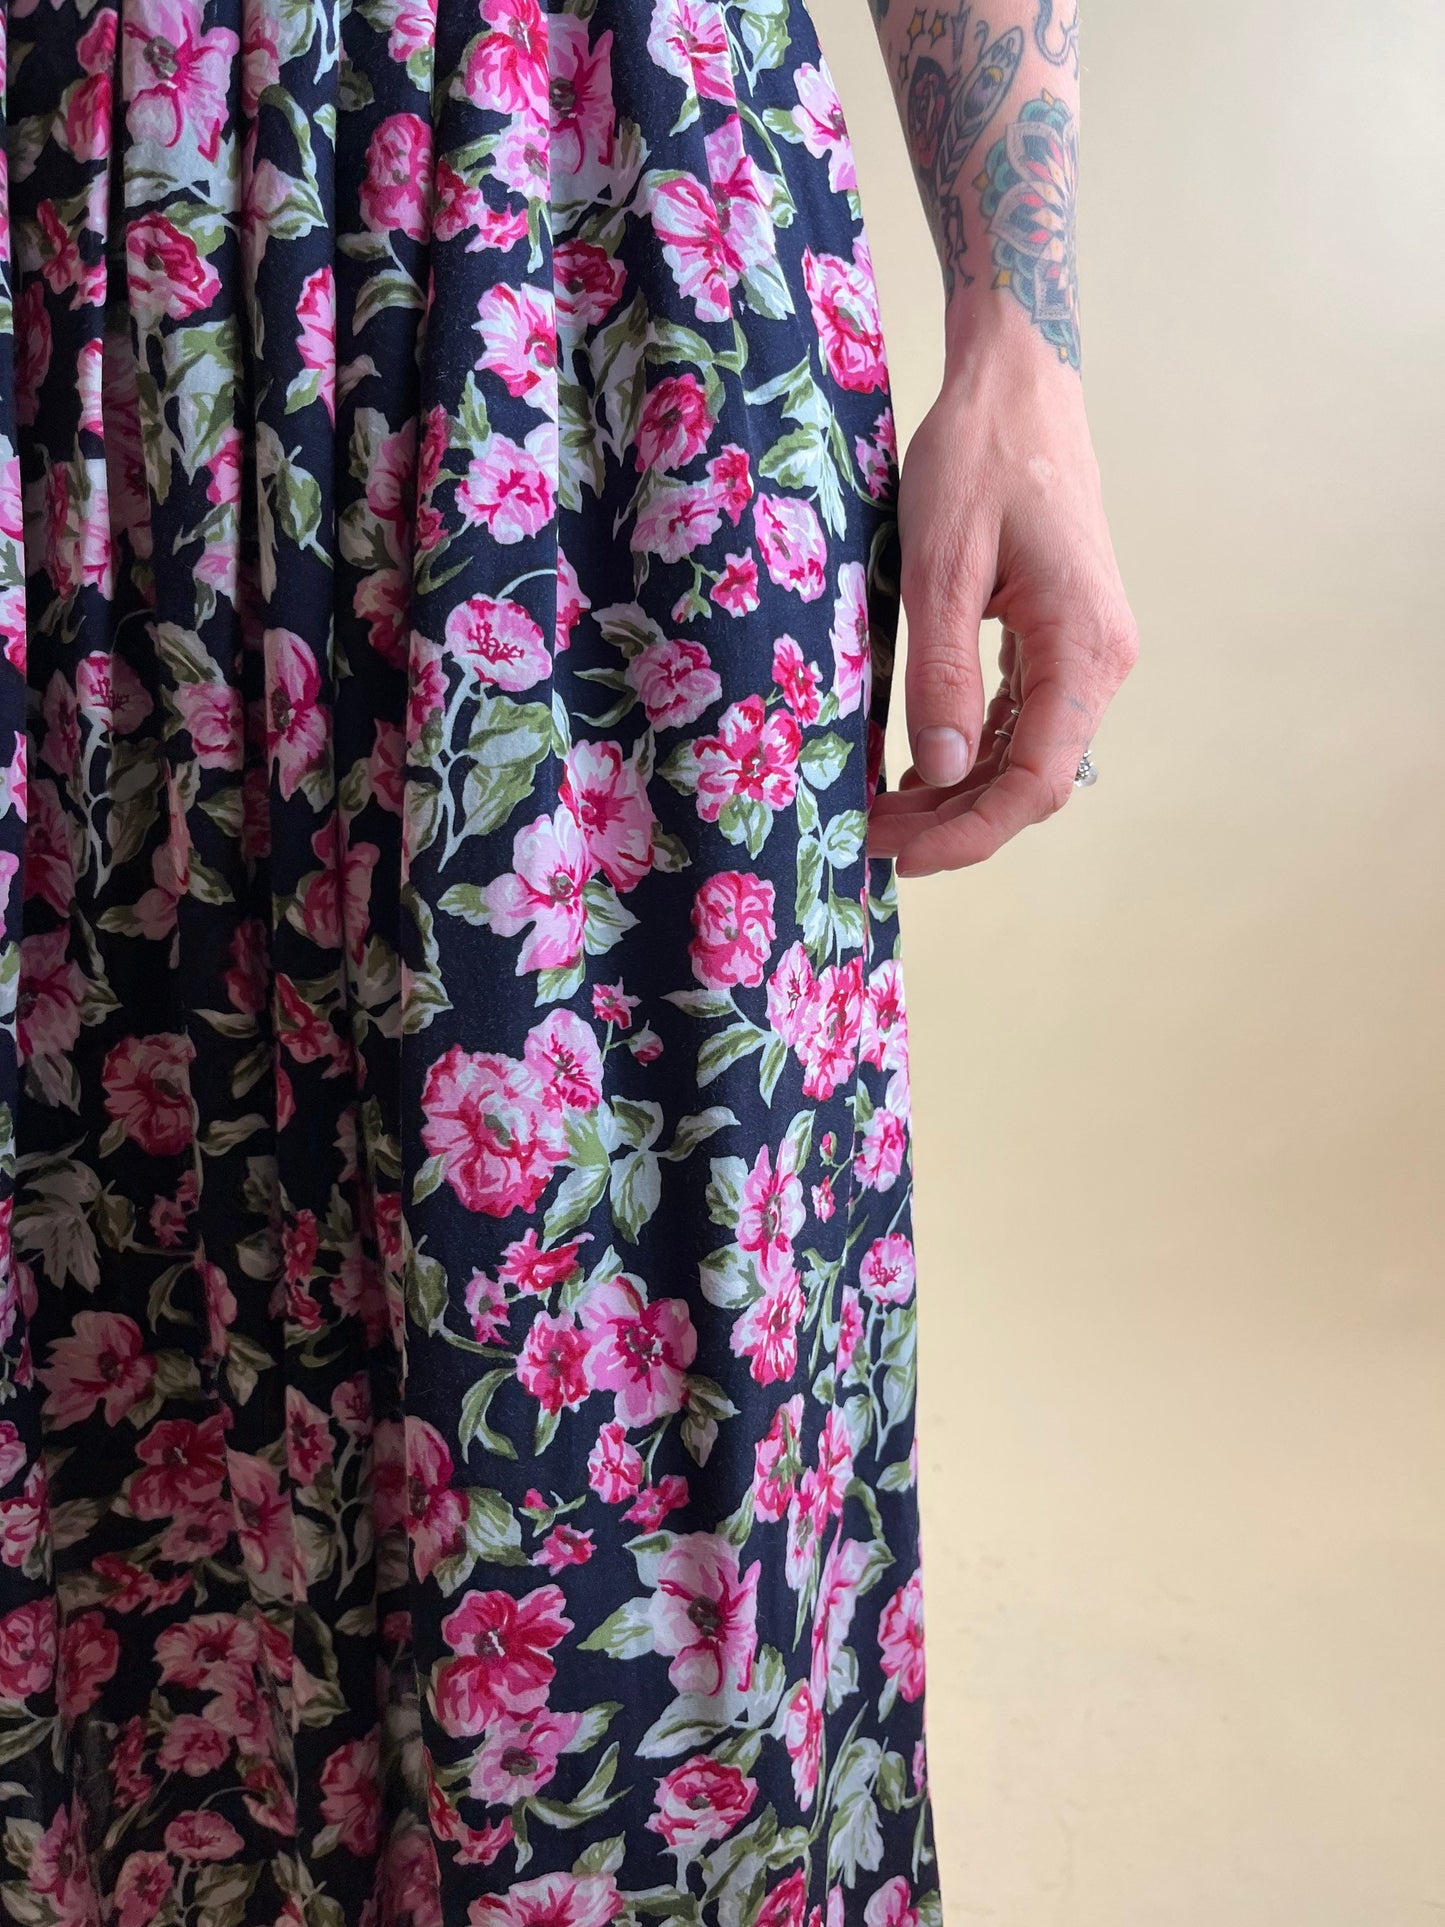 90s Floral Print Rayon Midi Skirt / Made in Canada / Small